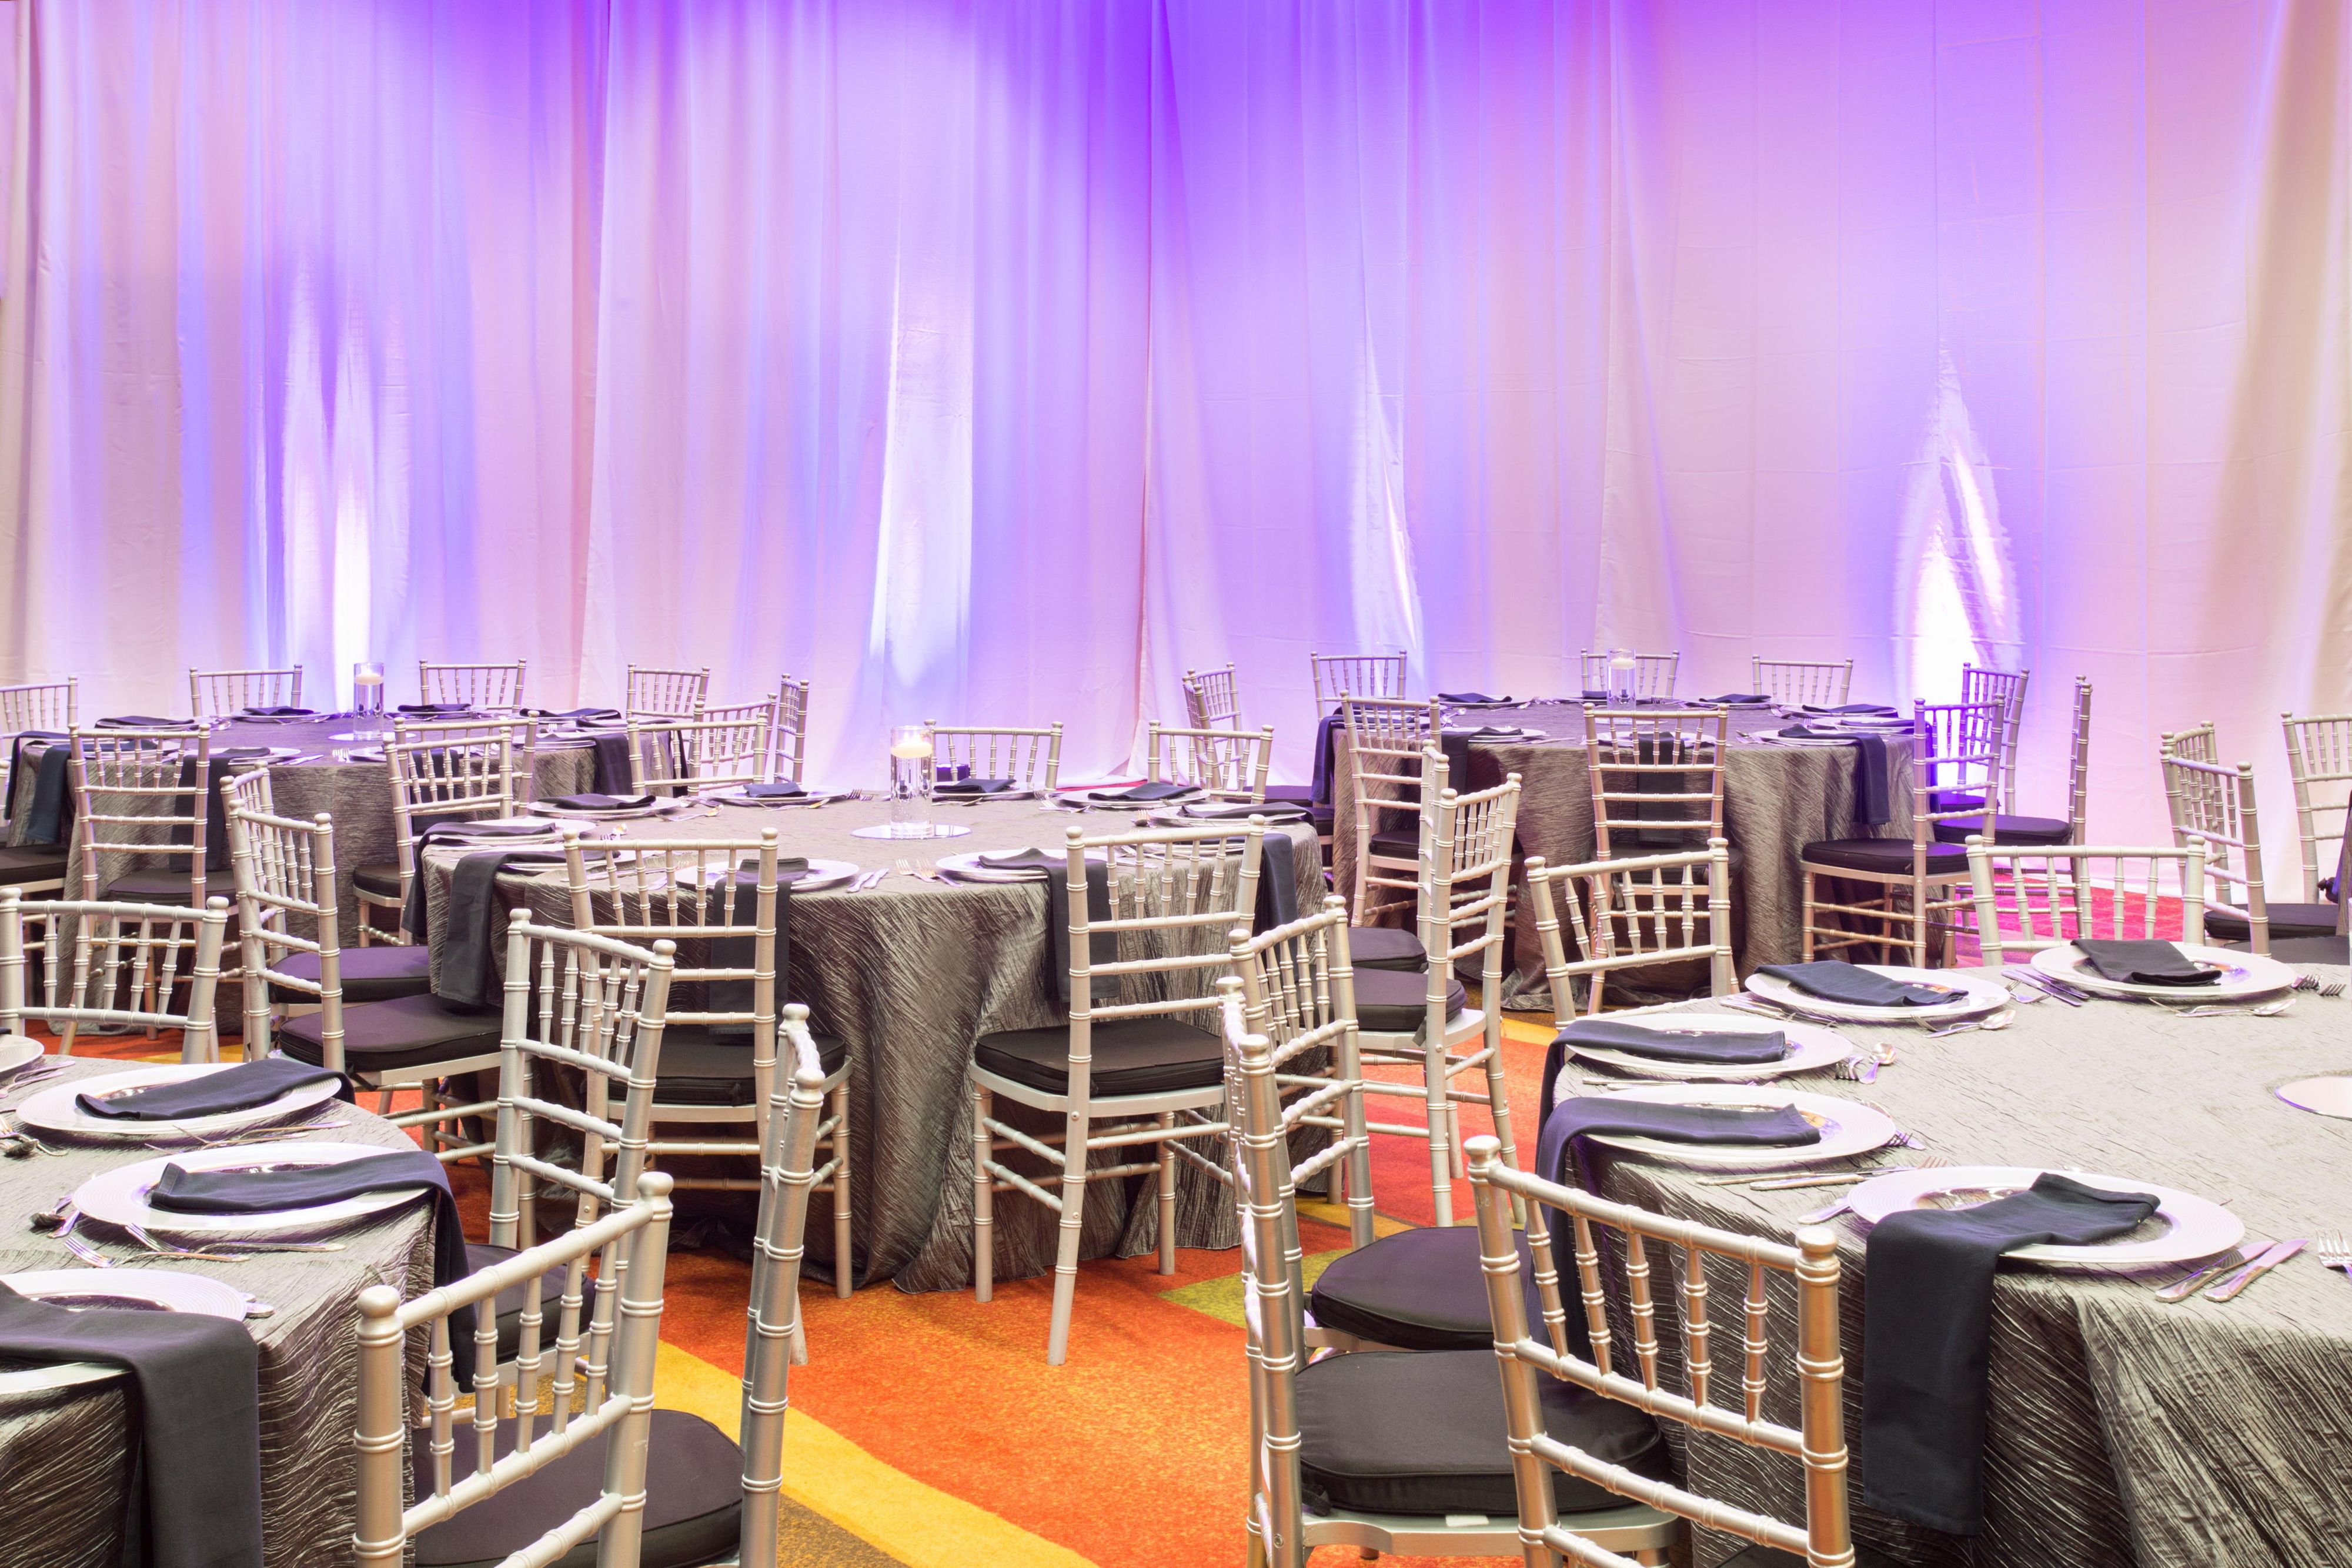 Let us take care of you and your event in our Breckenridge Room